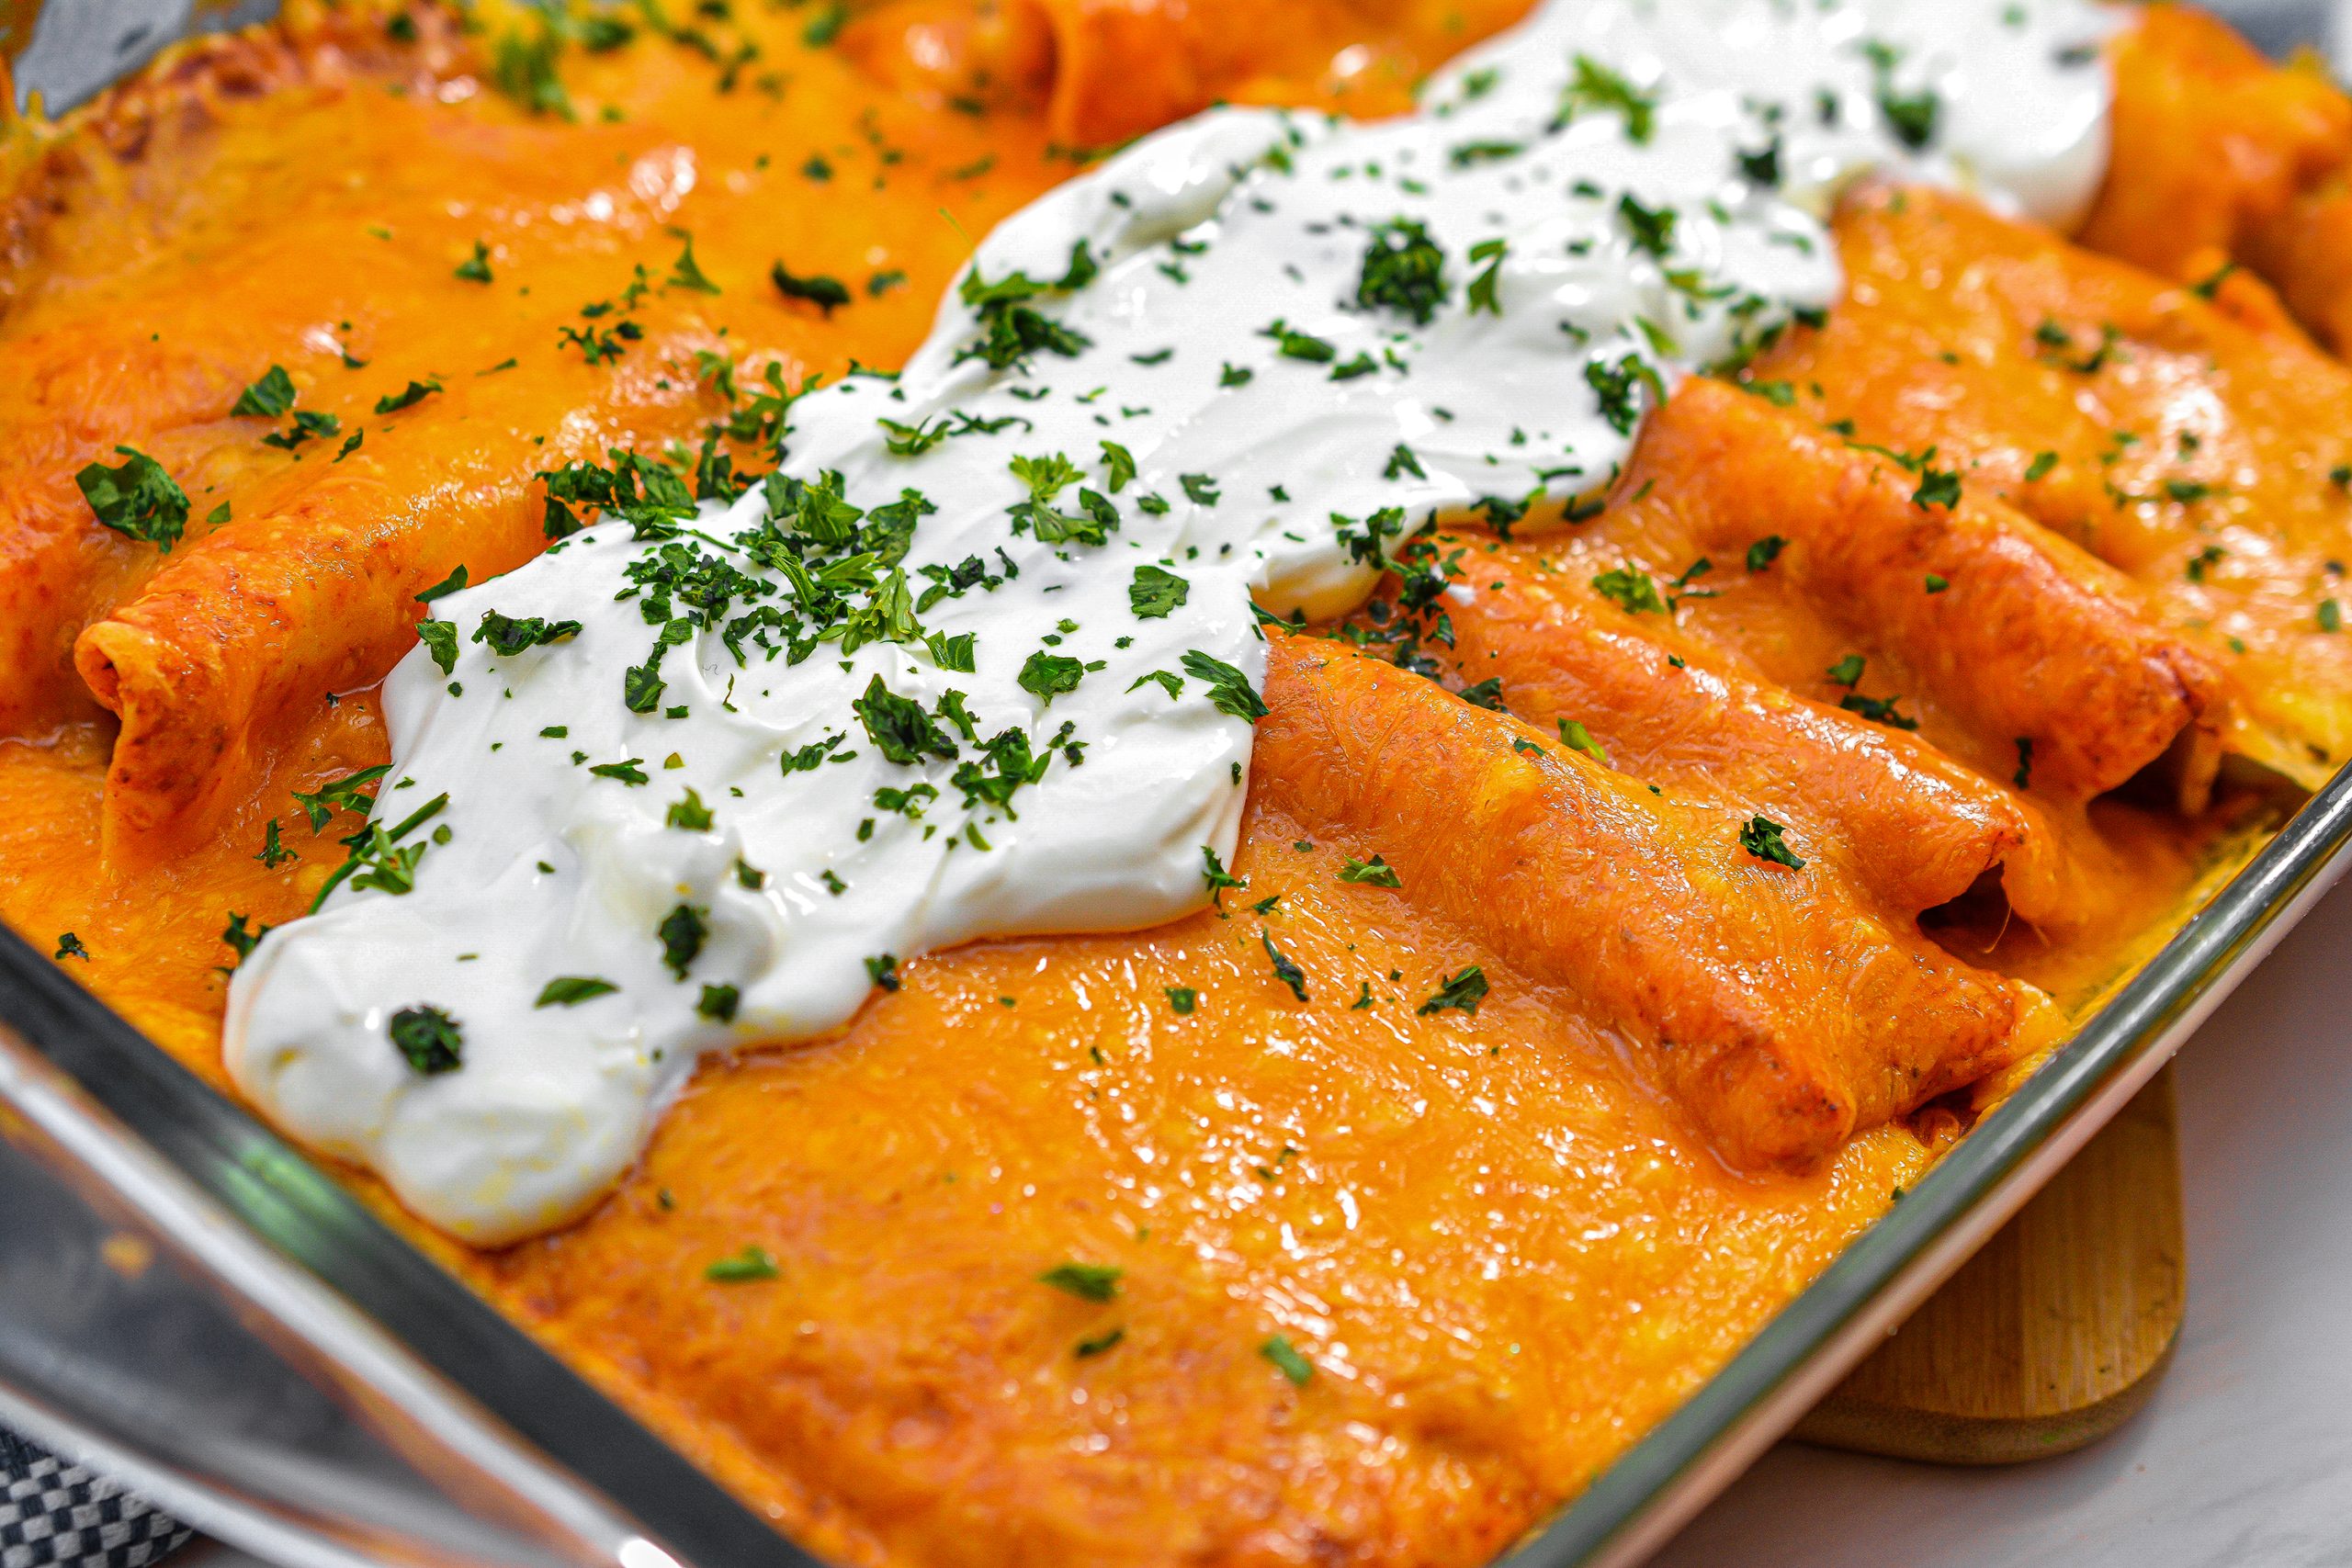 Bake for 20 minutes and garnish with sour cream and cilantro before serving